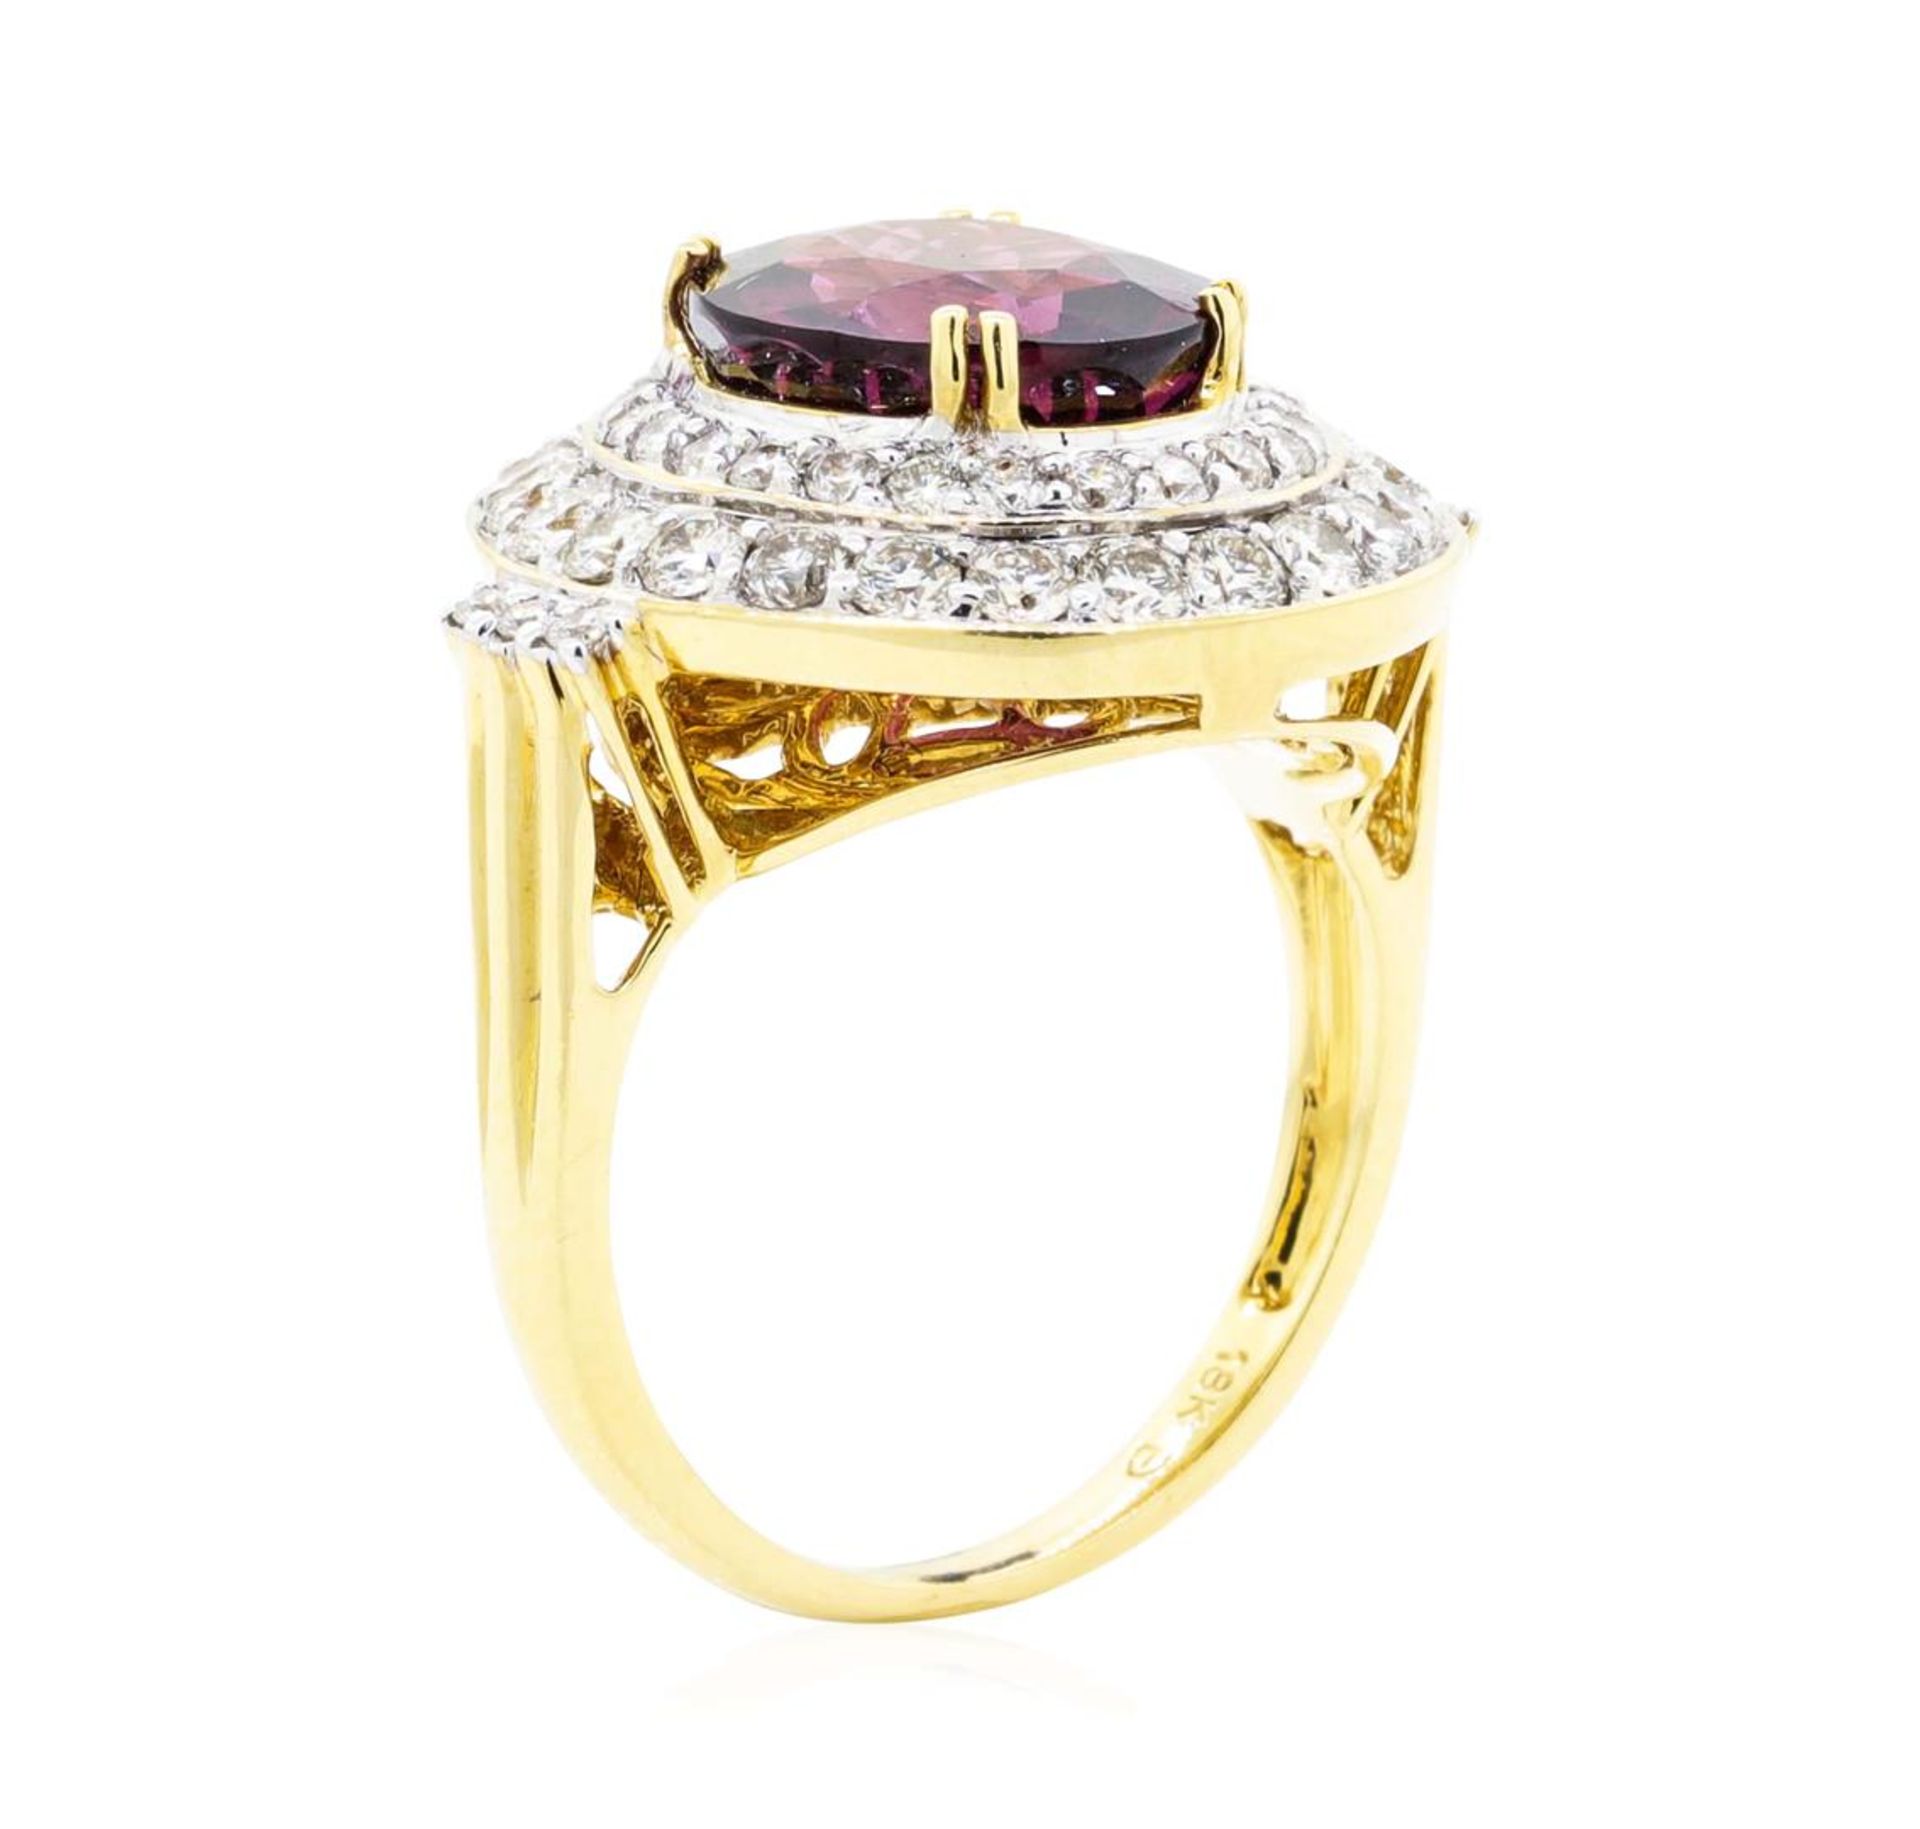 6.64 ctw Oval Mixed Lavender Spinel And Round Brilliant Cut Diamond Ring - 18KT - Image 4 of 5